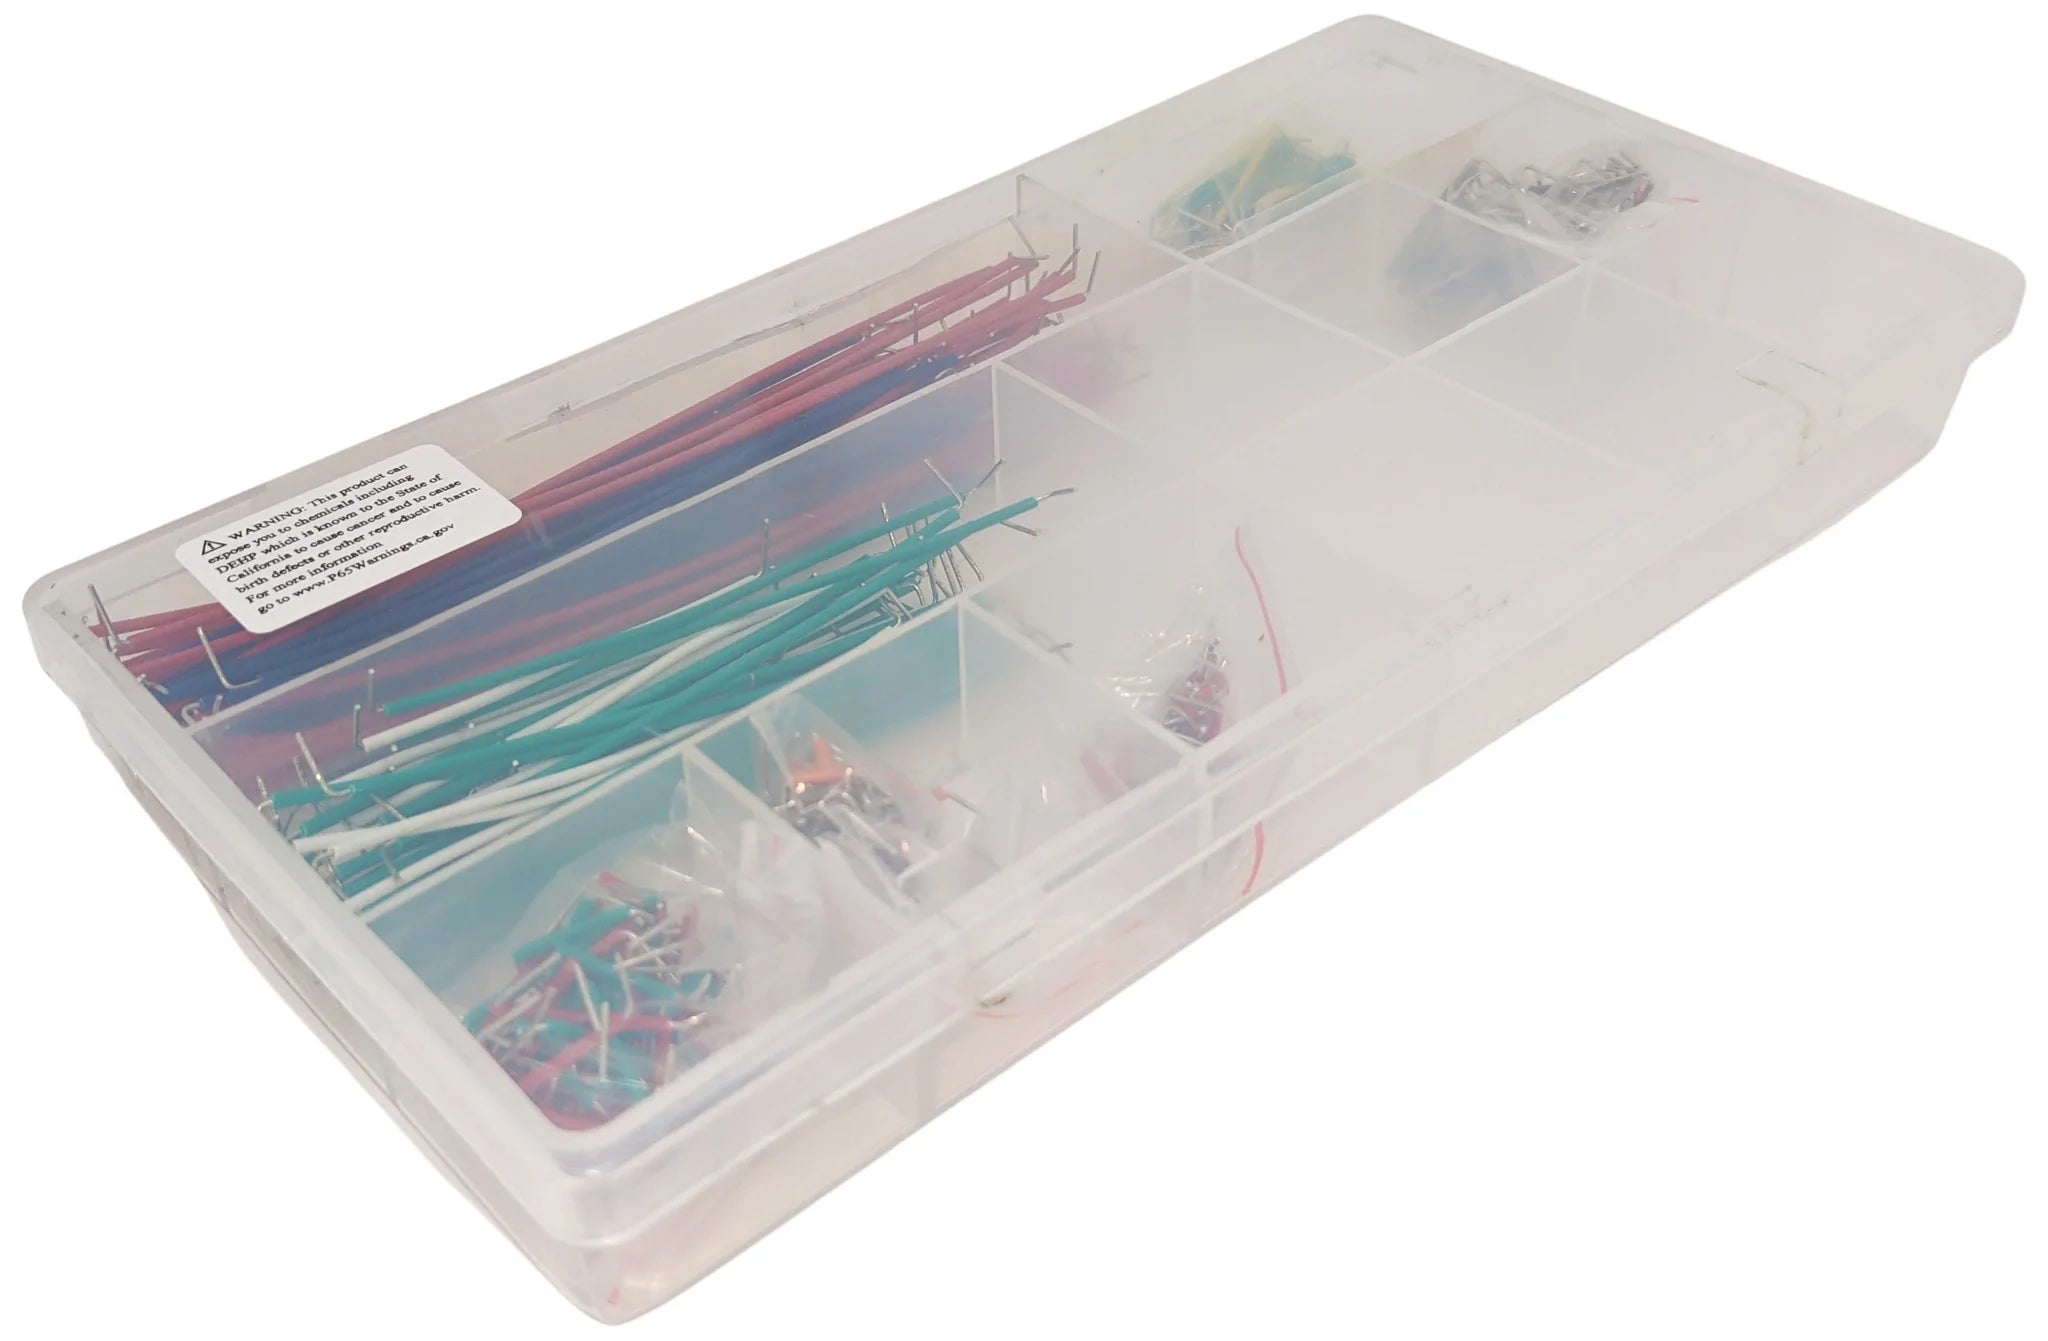 350 Piece Breadboard Jumper Wire Kit with Plastic Storage Case, Assorted Lengths and Colors